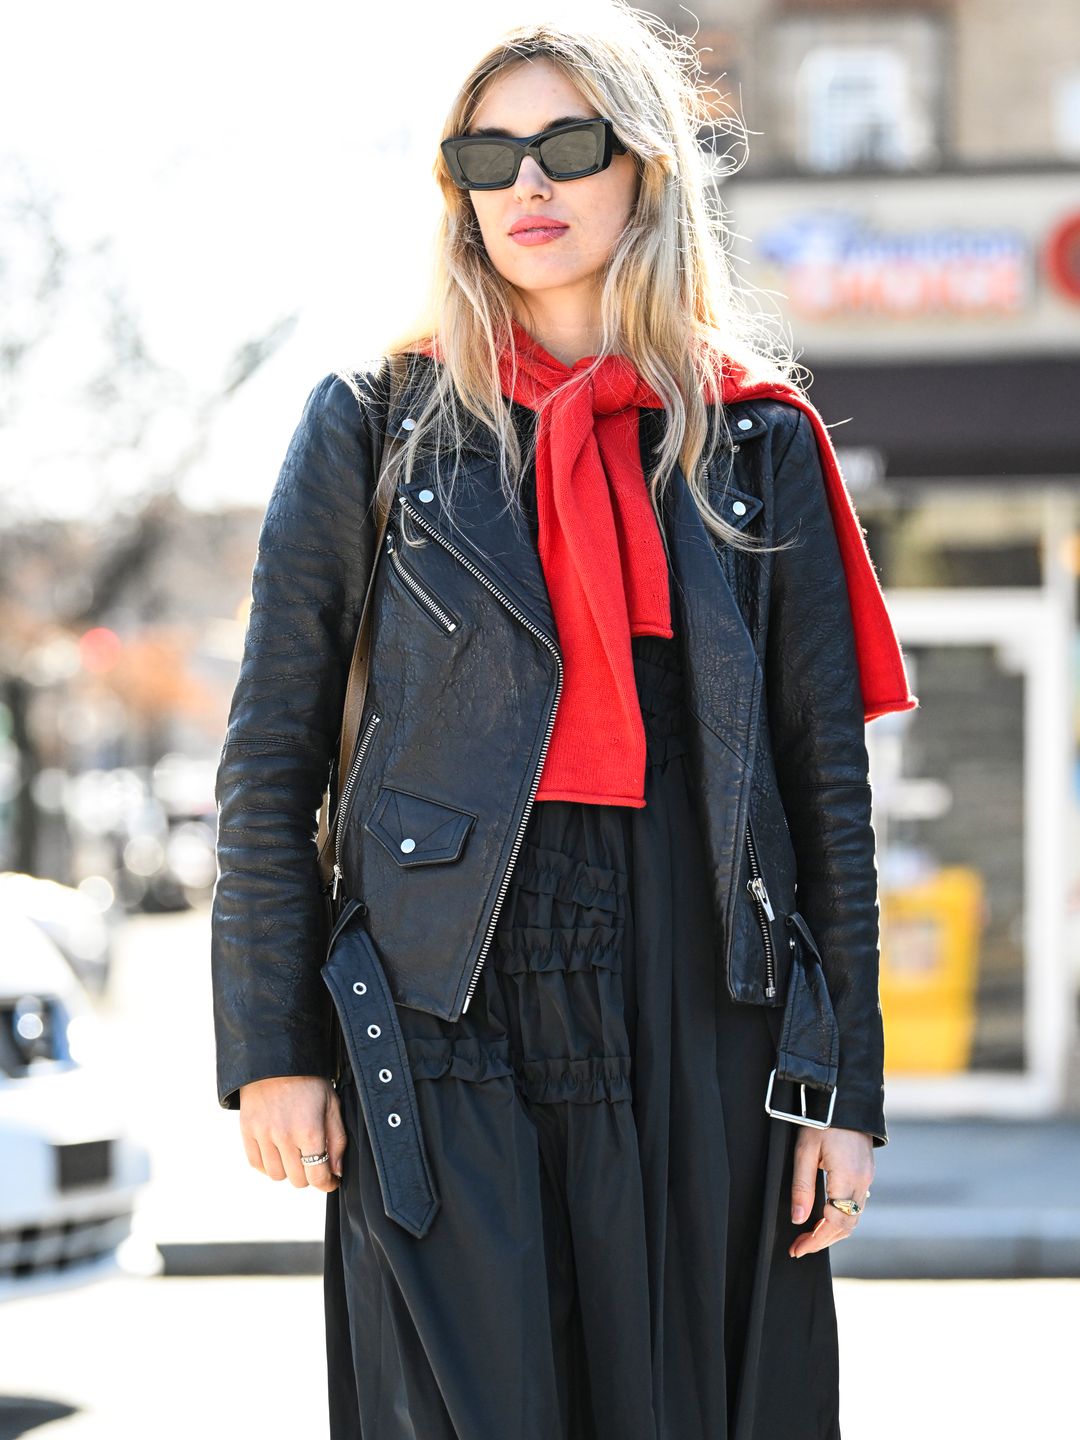 Aemilia Fay dons a black biker jacket over a black dress with ruffle accents, complete with a pop of colour in the form of an over the shoulder red jumper.